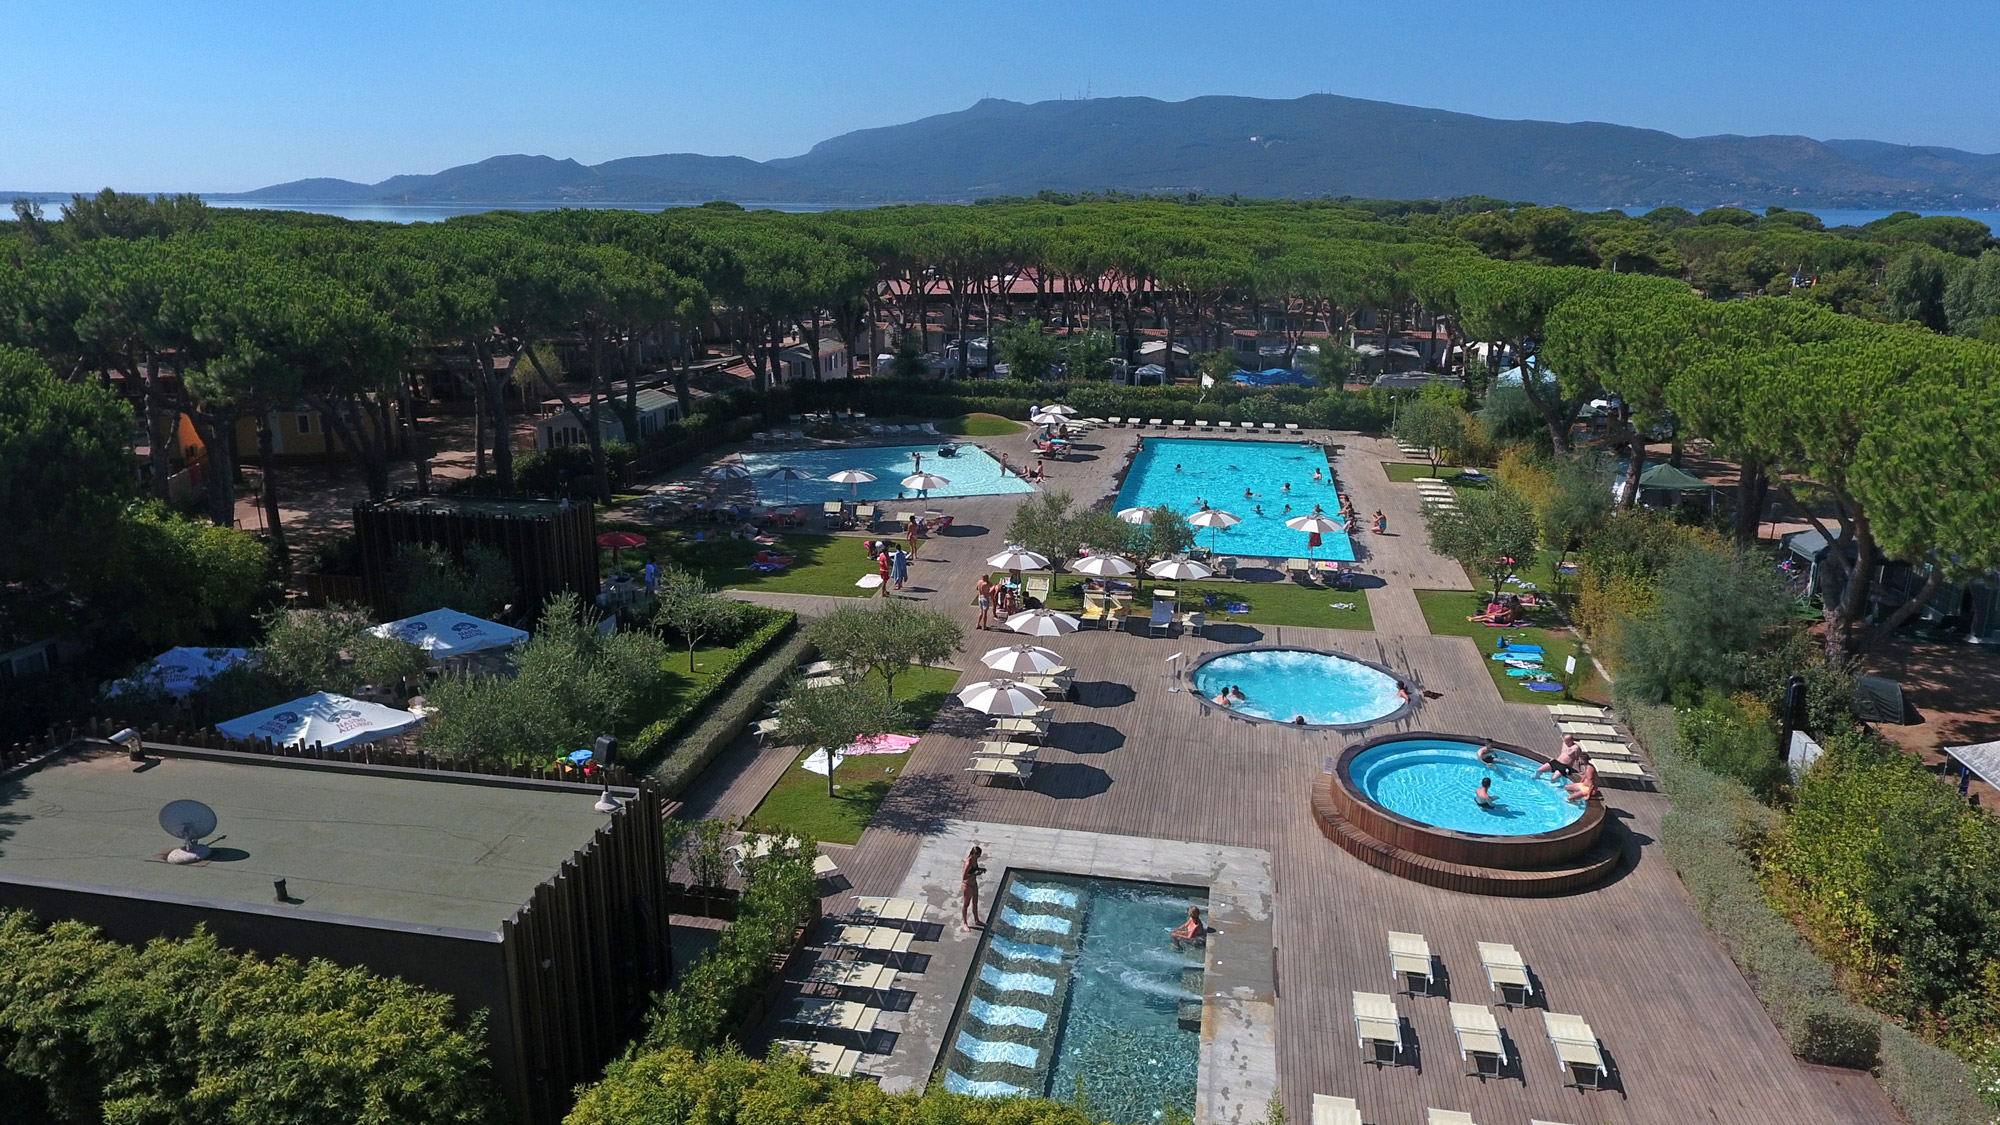 All the information you need about Orbetello Family Camping Village